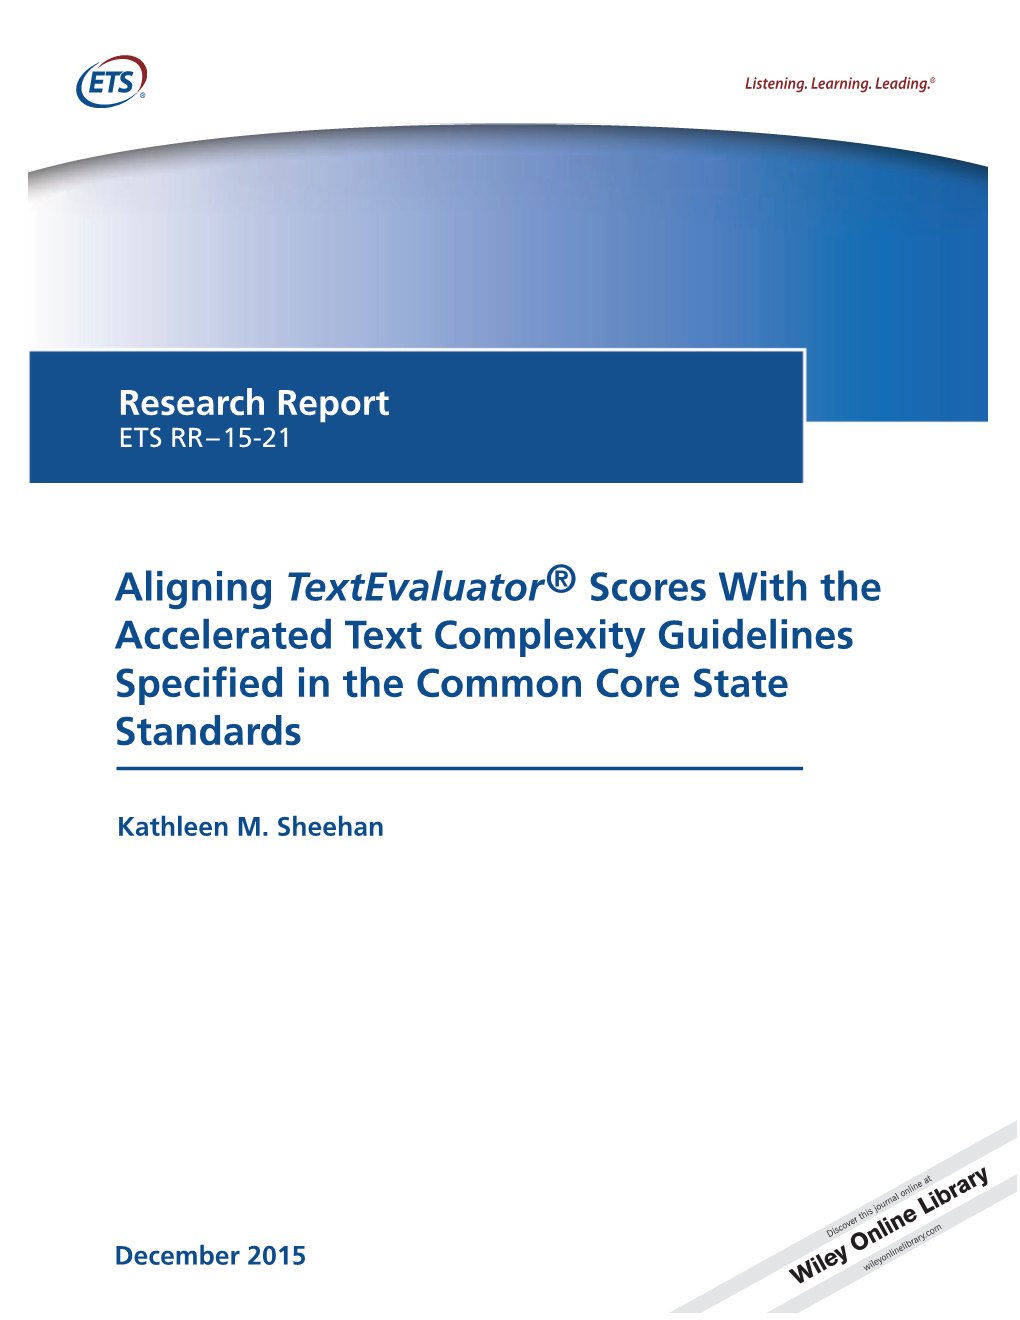 Aligning Textevaluatorâ® Scores with the Accelerated Text Complexity